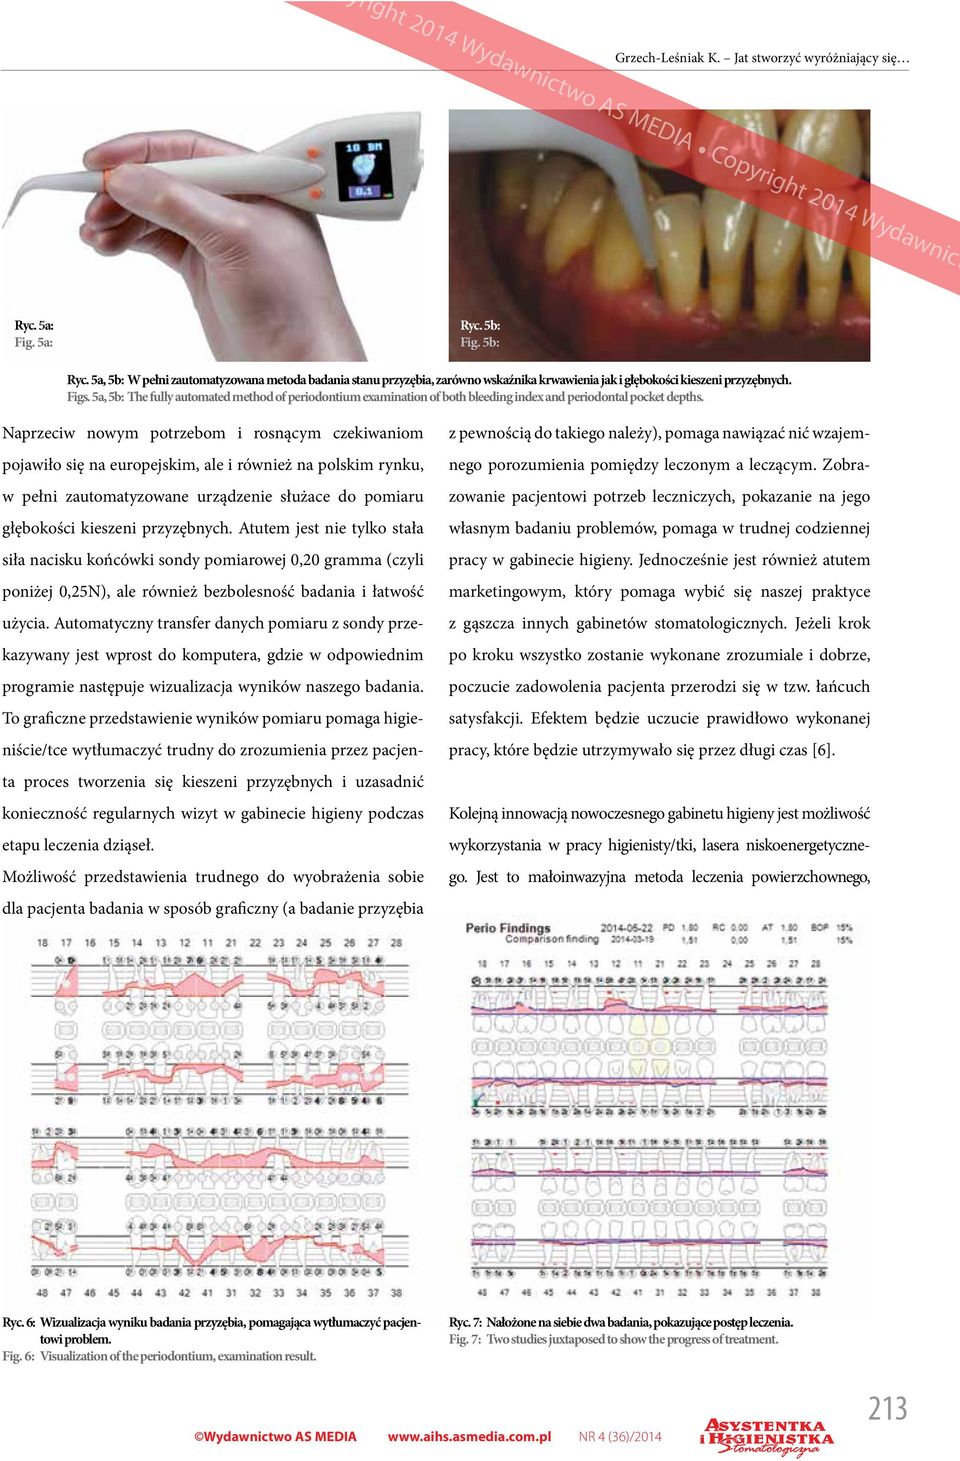 5a, 5b: The fully automated method of periodontium examination of both bleeding index and periodontal pocket depths.